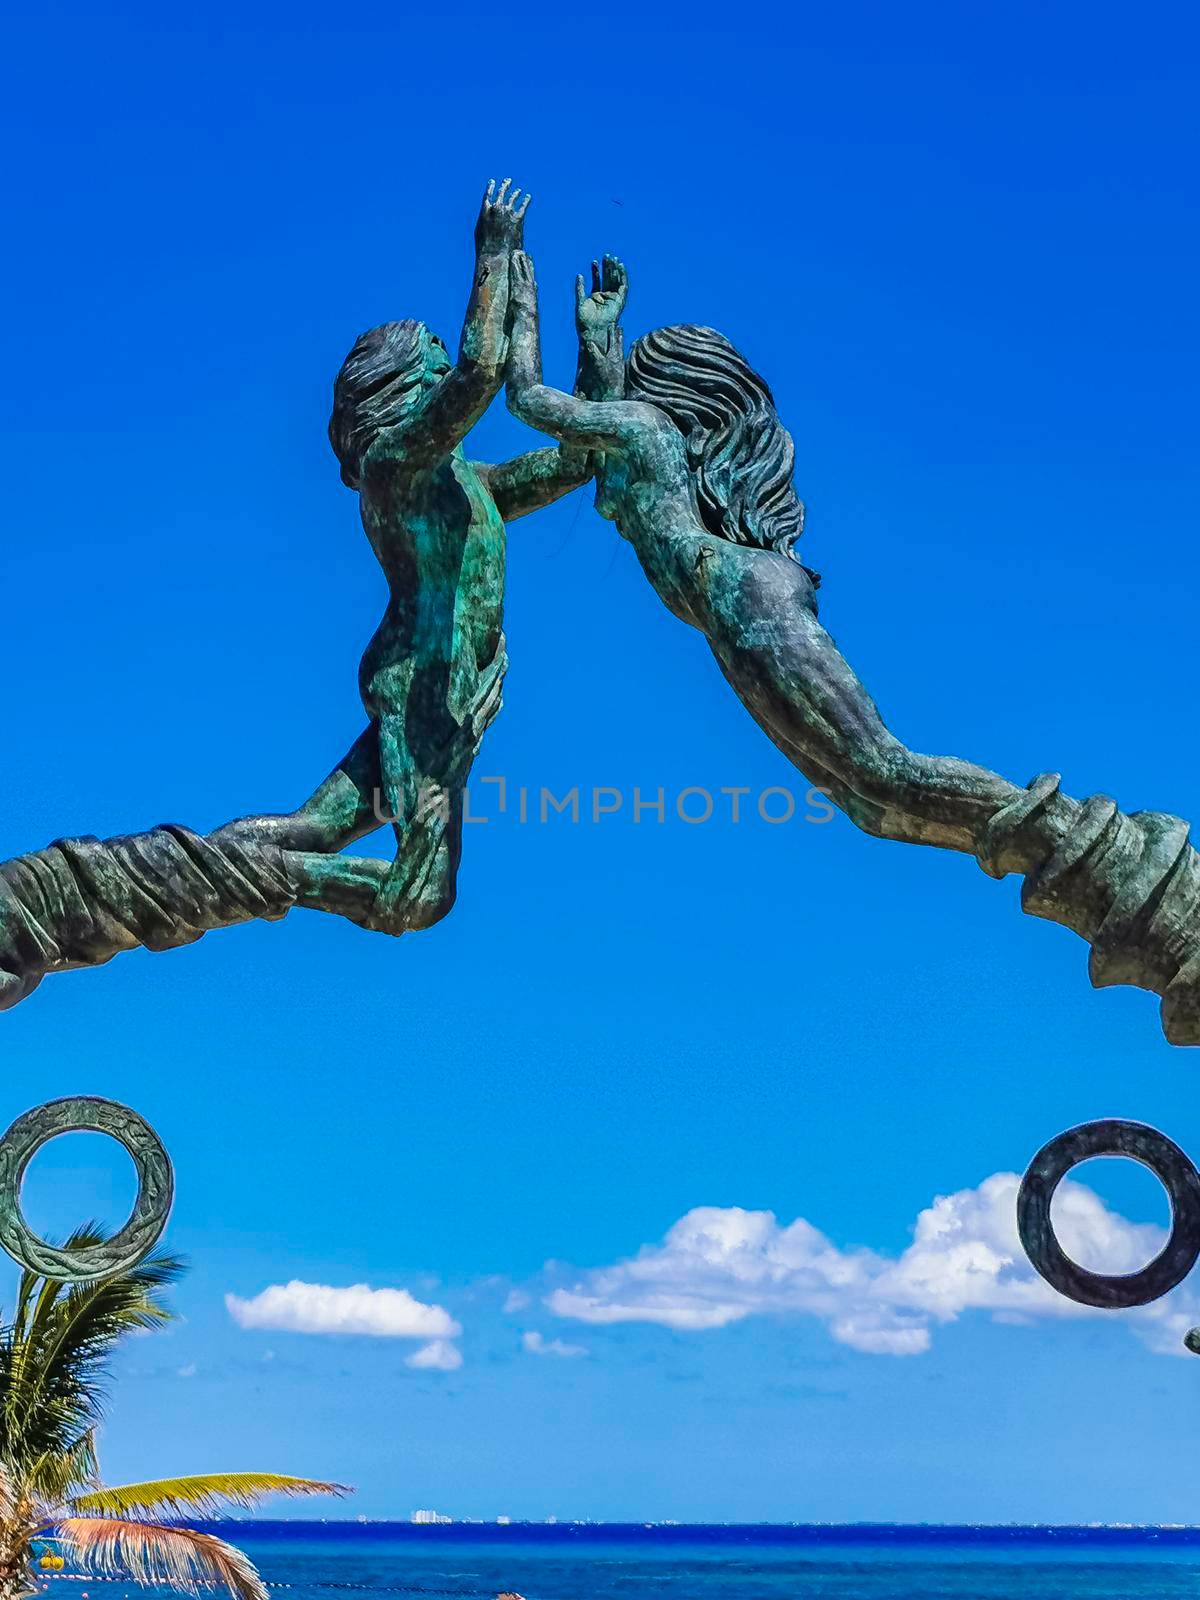 The ancient architecture of the Portal Maya in the Fundadores park with blue sky and turquoise seascape and beach panorama in Playa del Carmen Quintana Roo Mexico.